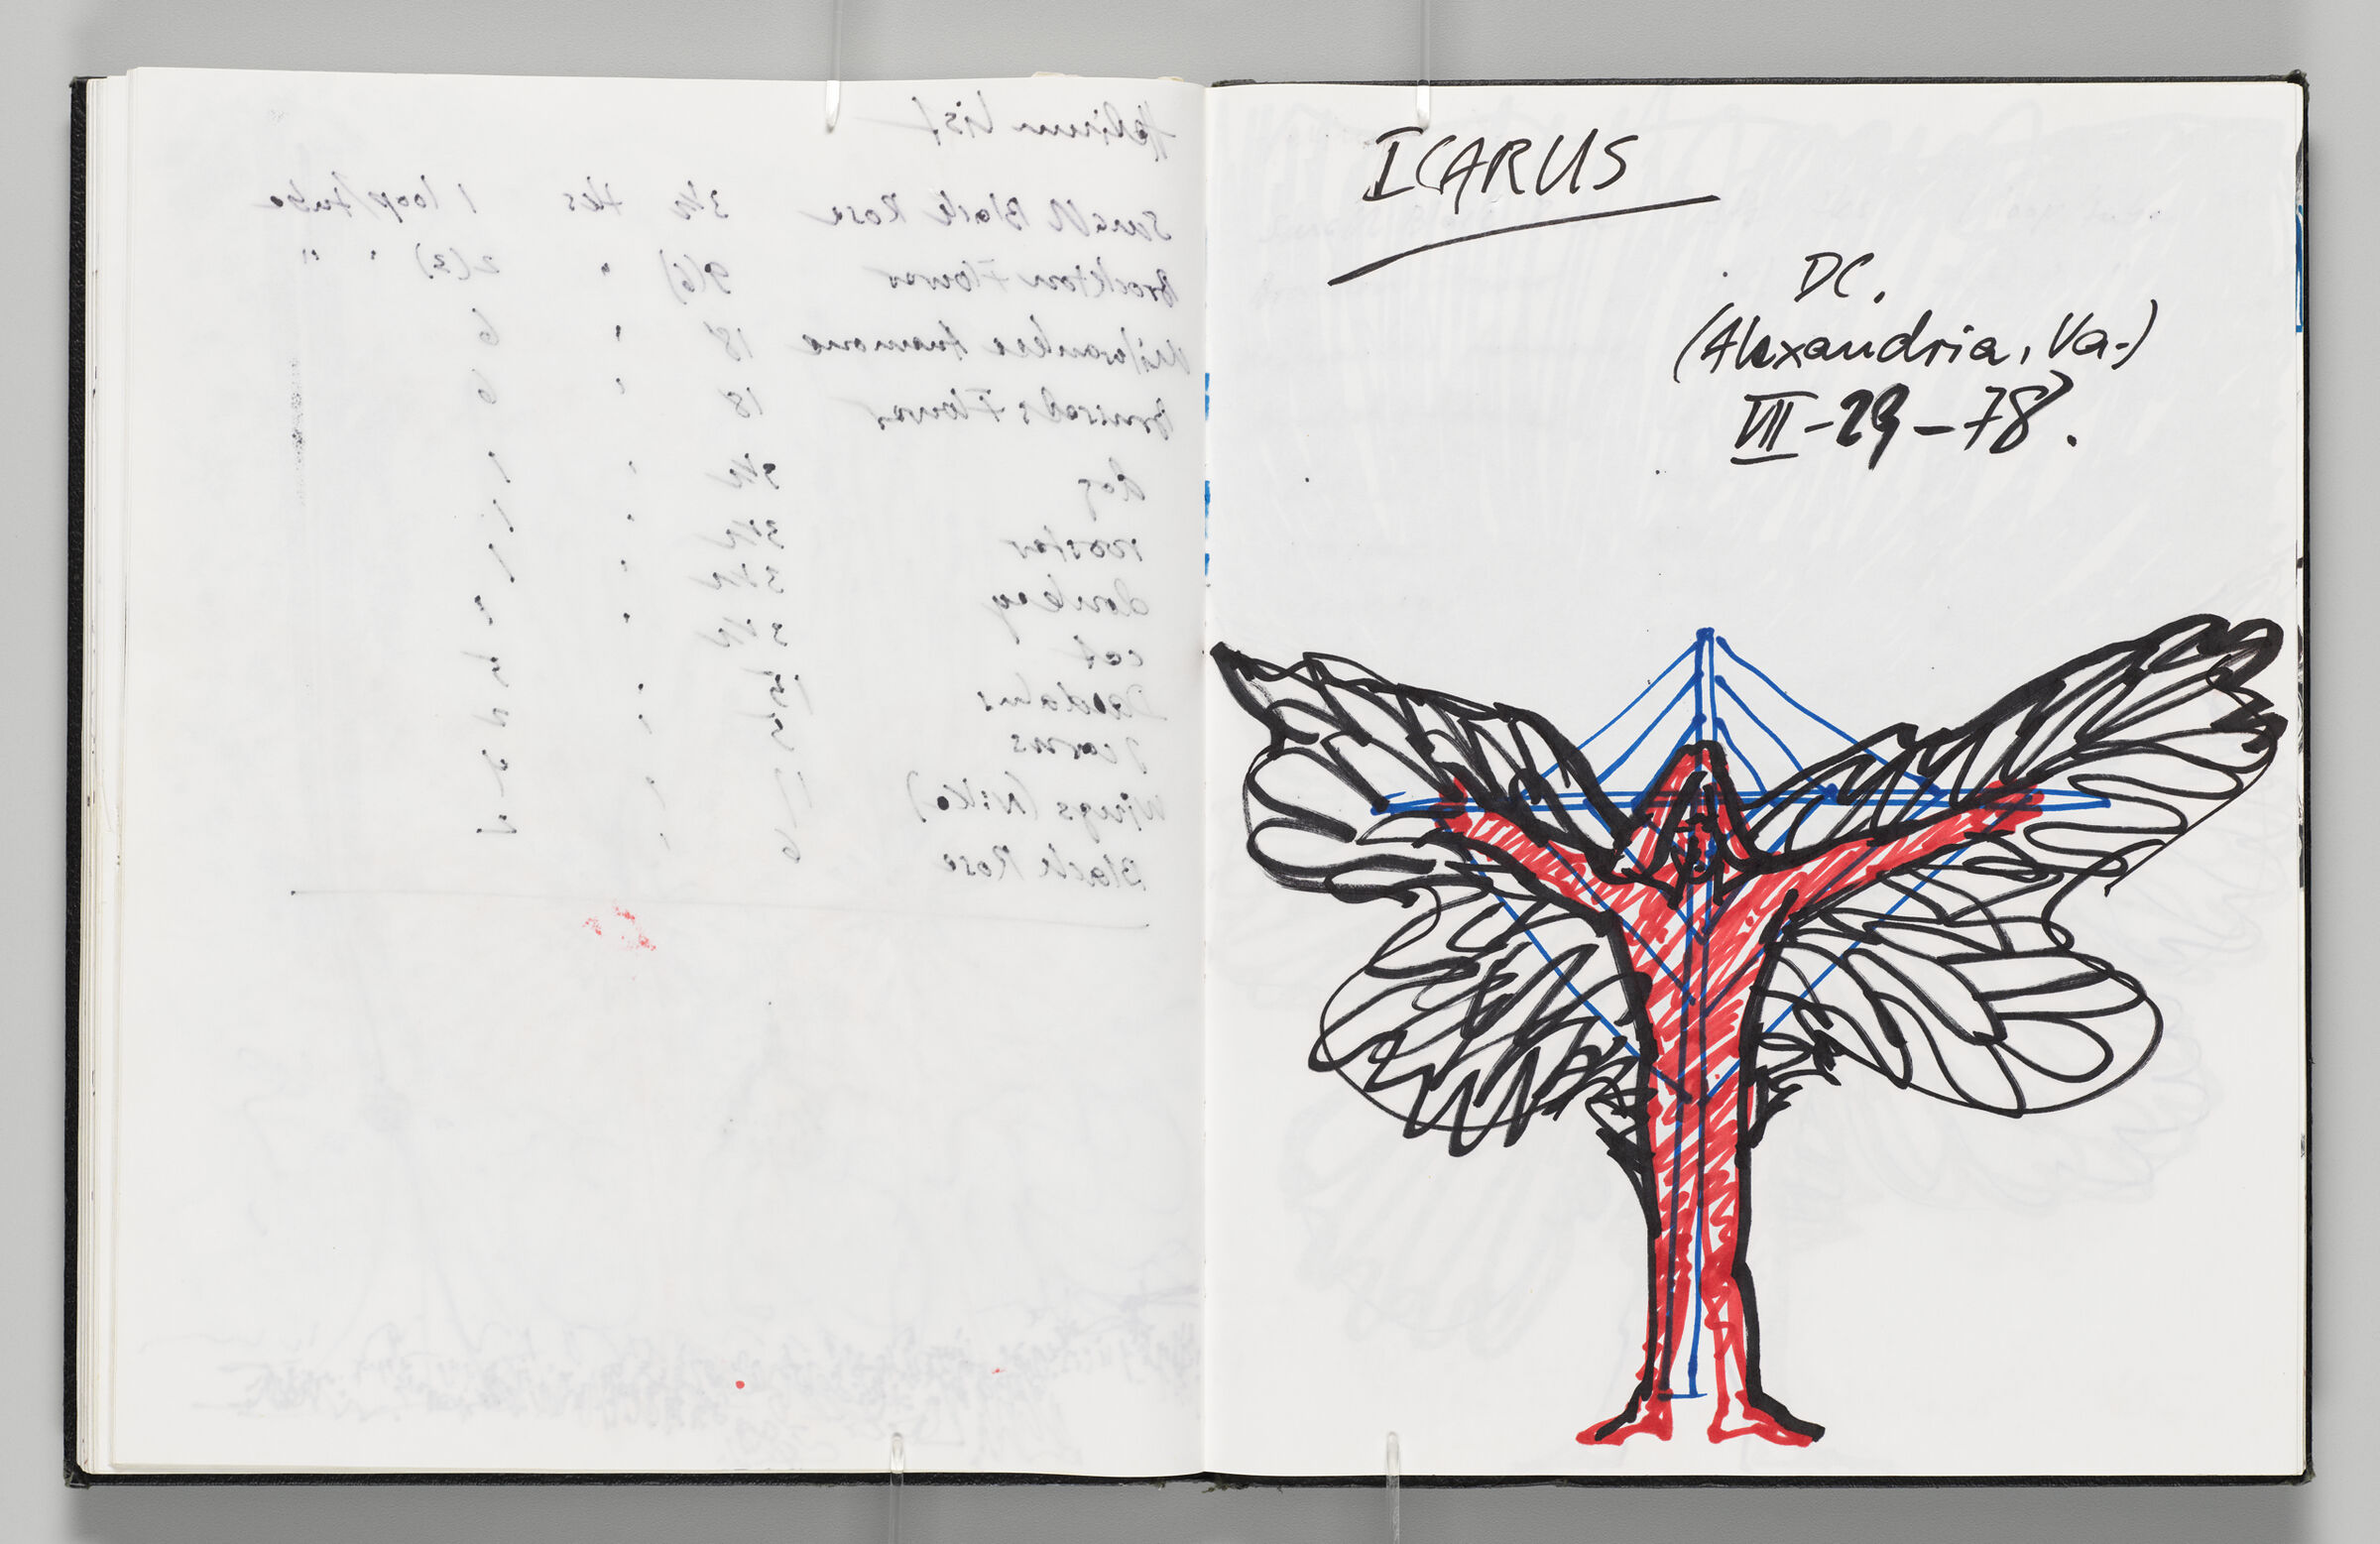 Untitled (Bleed-Through Of Previous Page, Left Page); Untitled (Sketch Of Icarus, Right Page)